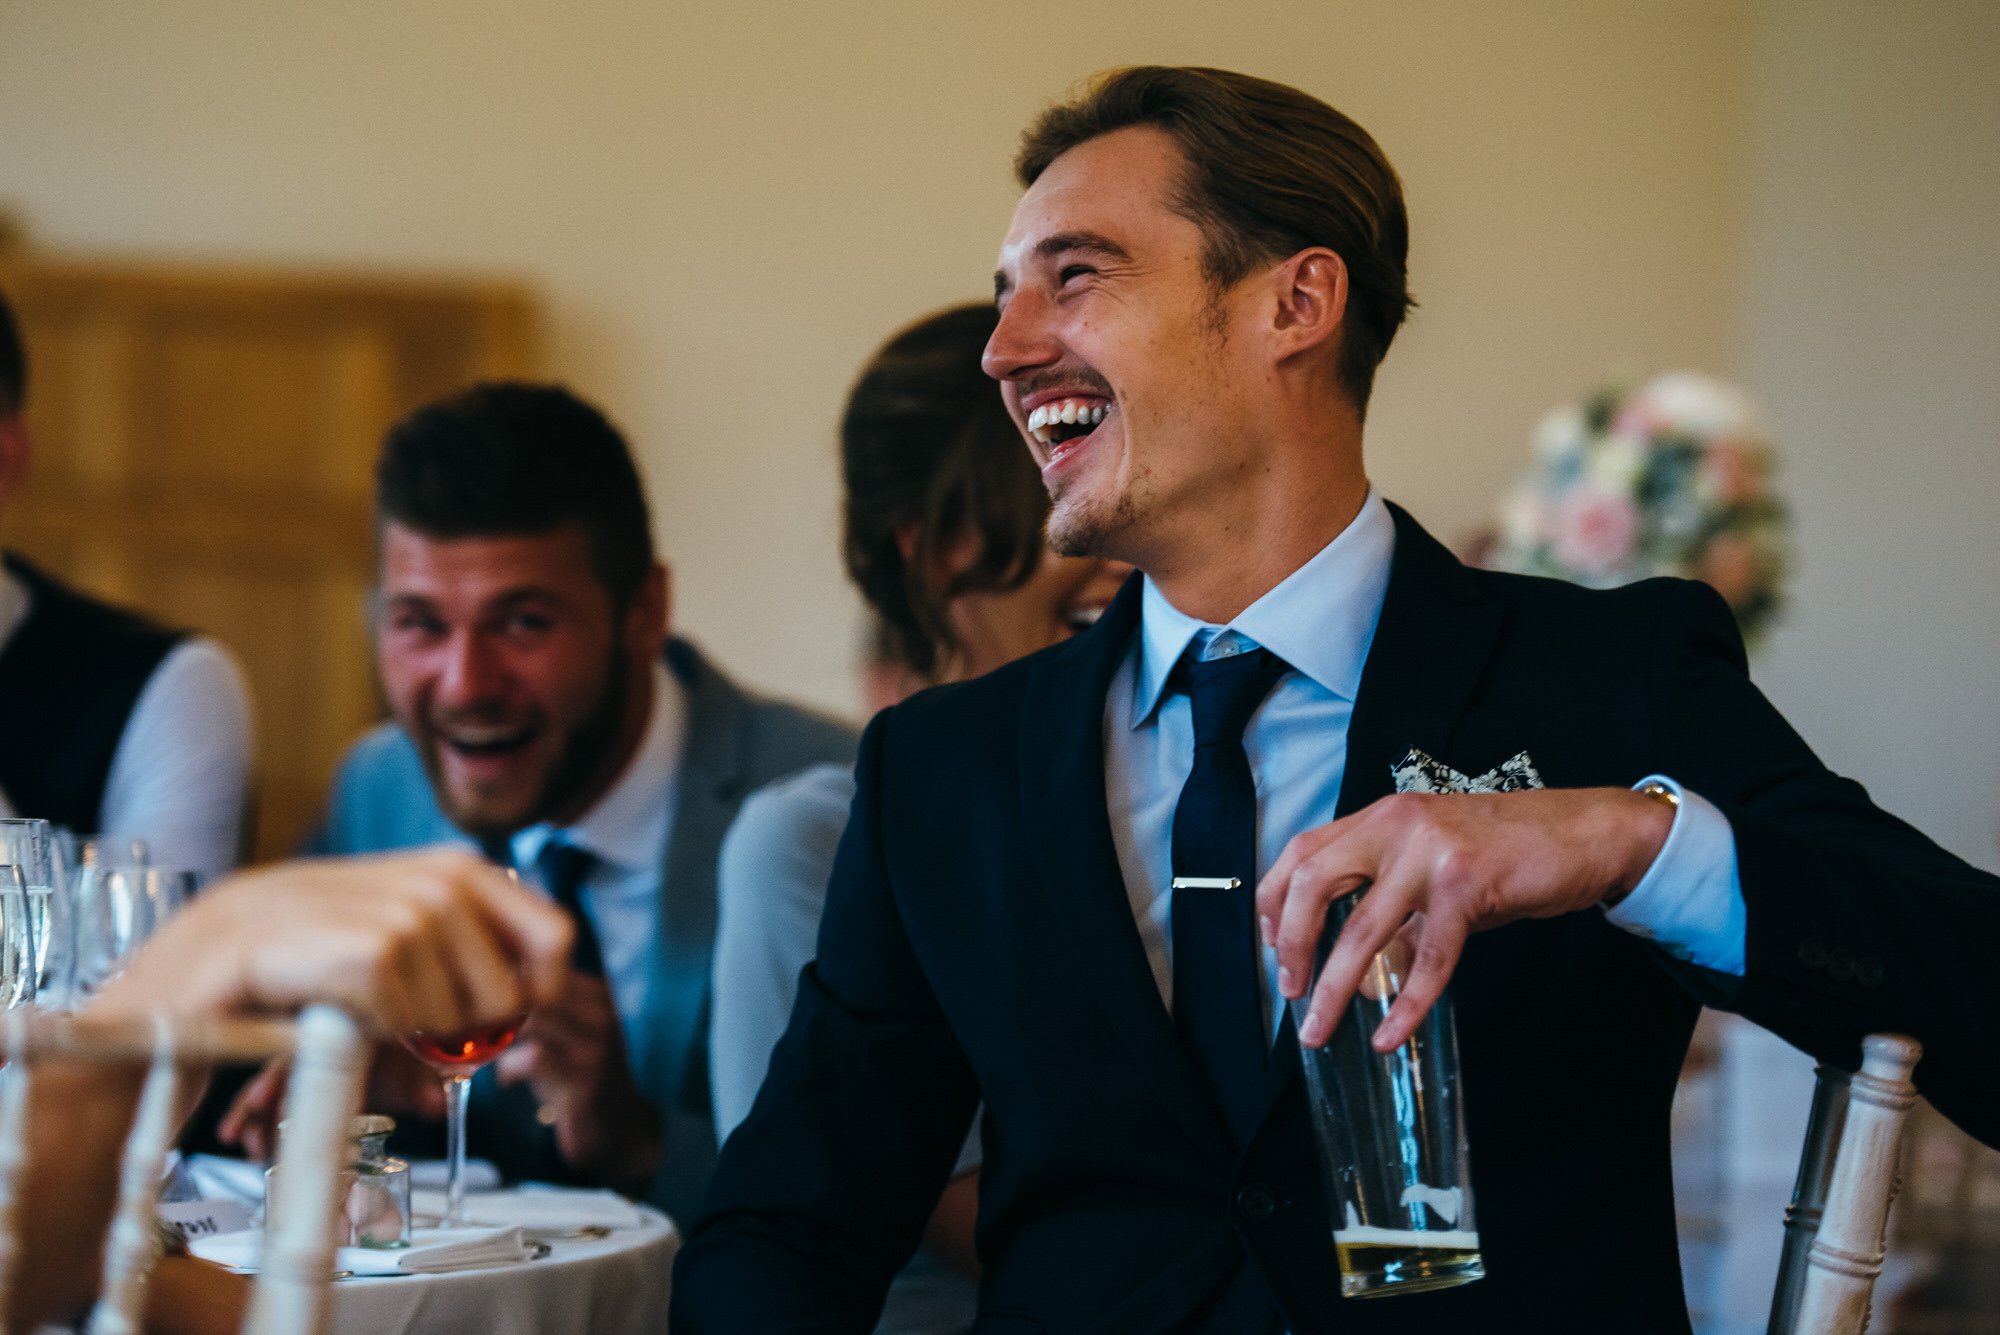 man laughing at speeches